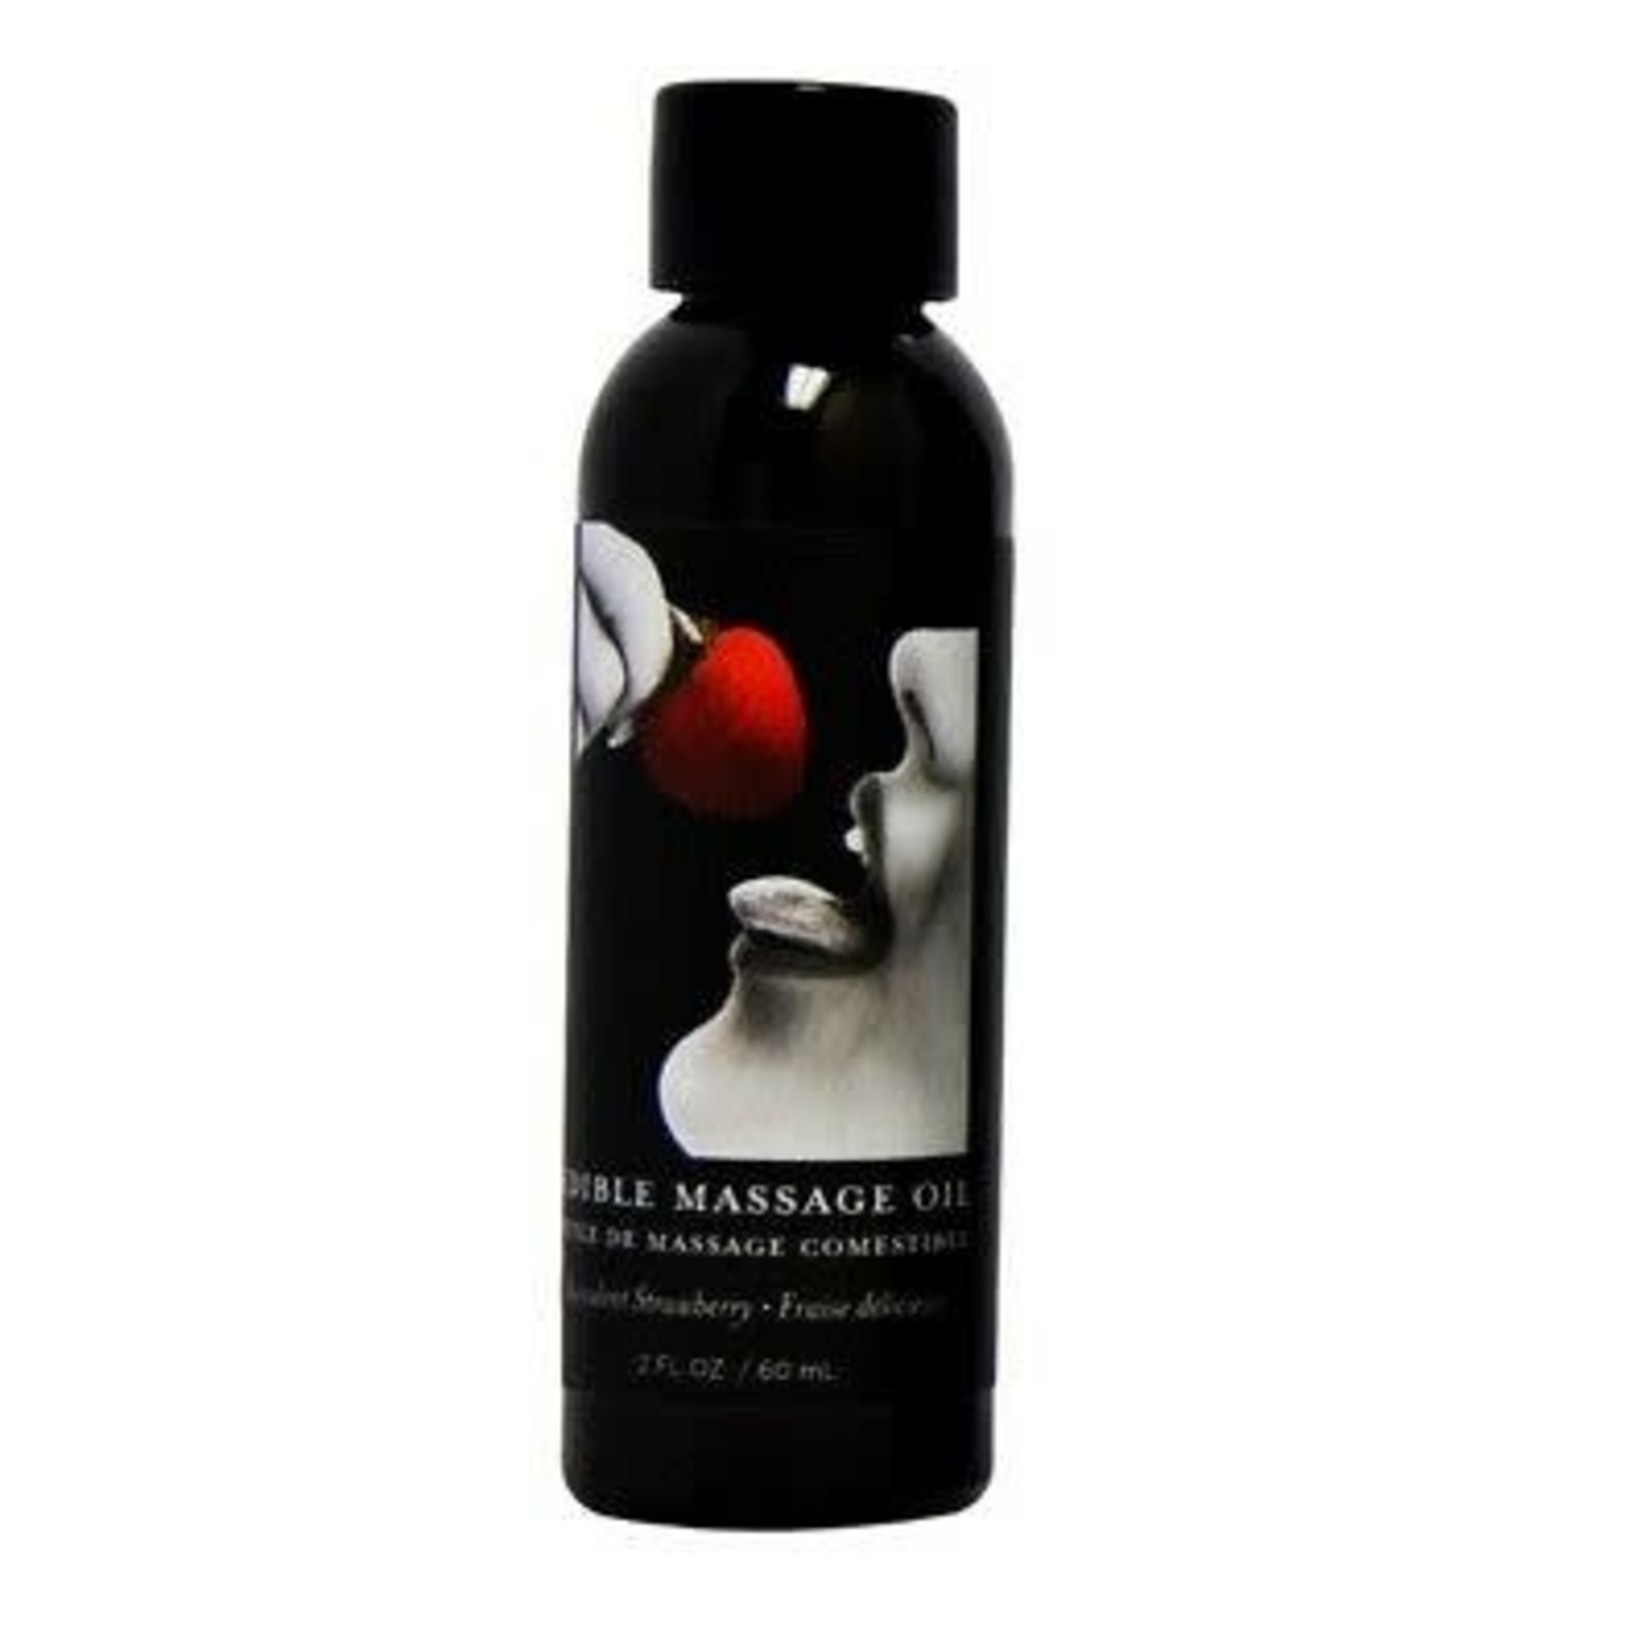 EARTHLY BODY EARTHLY BODIES - EDIBLE MASSAGE OIL - STRAWBERRY 2oz